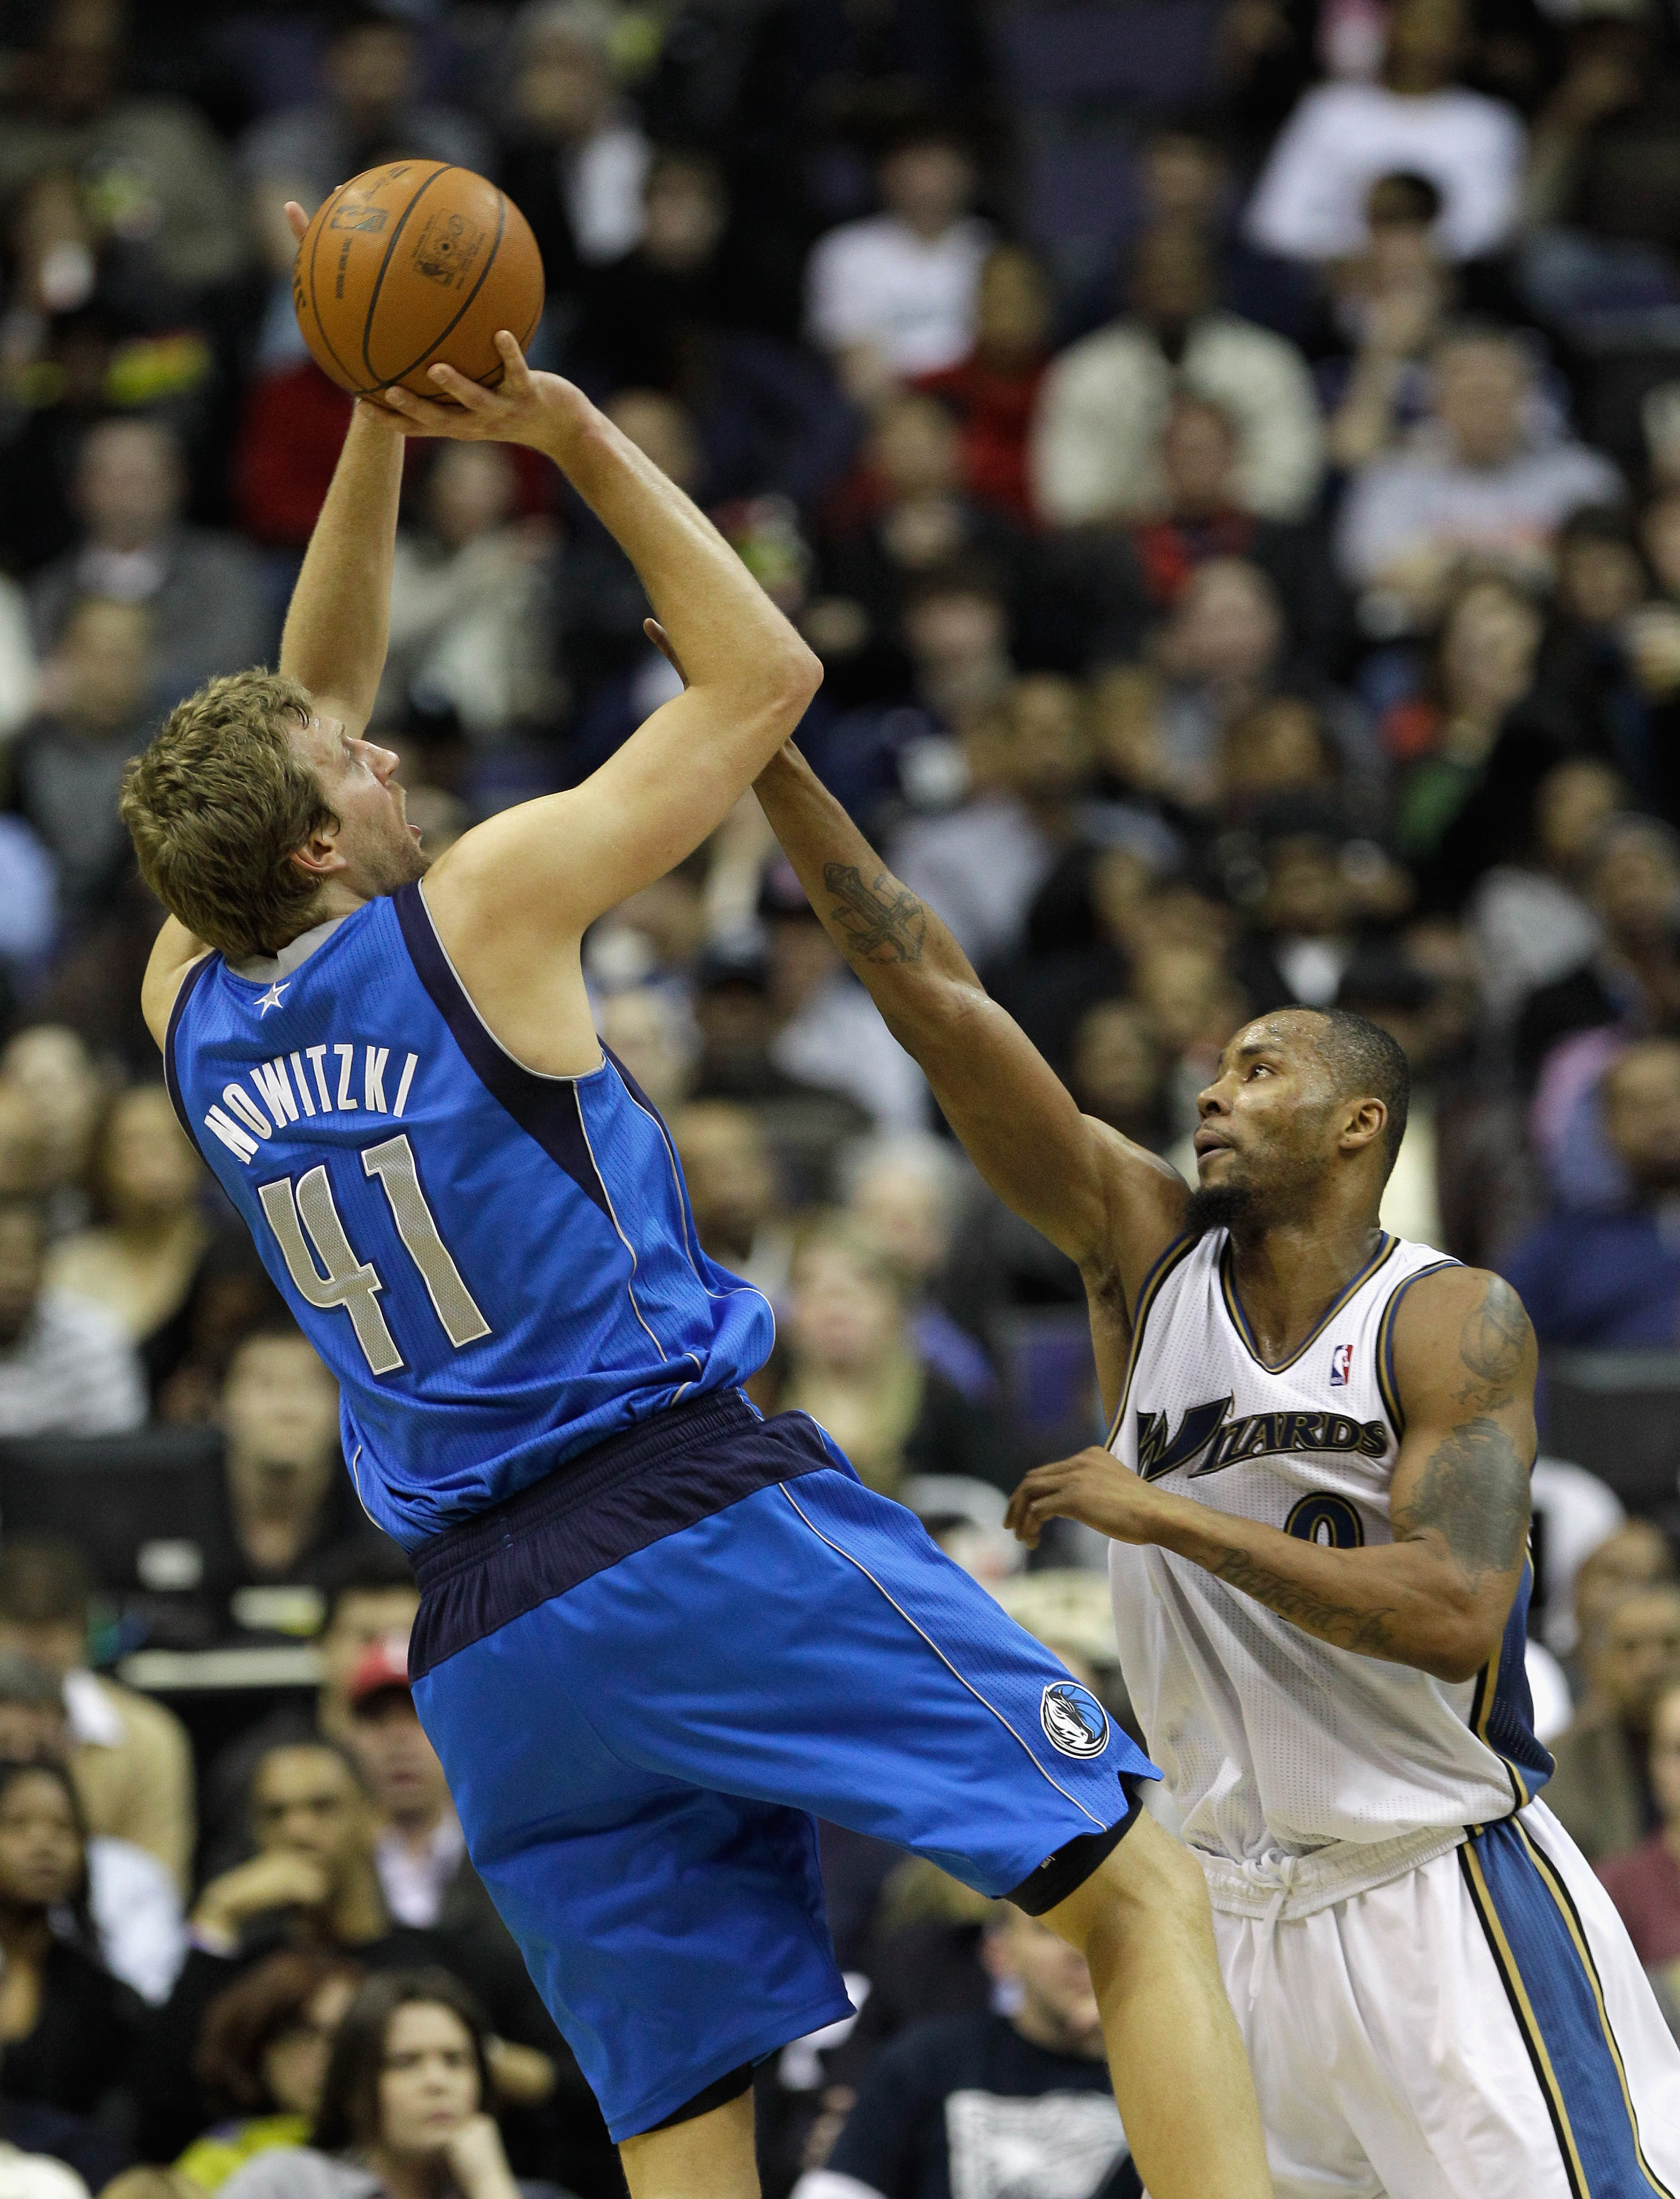 WASHINGTON, DC - FEBRUARY 26: Dirk Nowitzki #41 of the Dallas Mavericks puts up a shot in front of Rashard Lewis #9 of the Washington Wizards at the Verizon Center on February 26, 2011 in Washington, DC. NOTE TO USER: User expressly acknowledges and agree